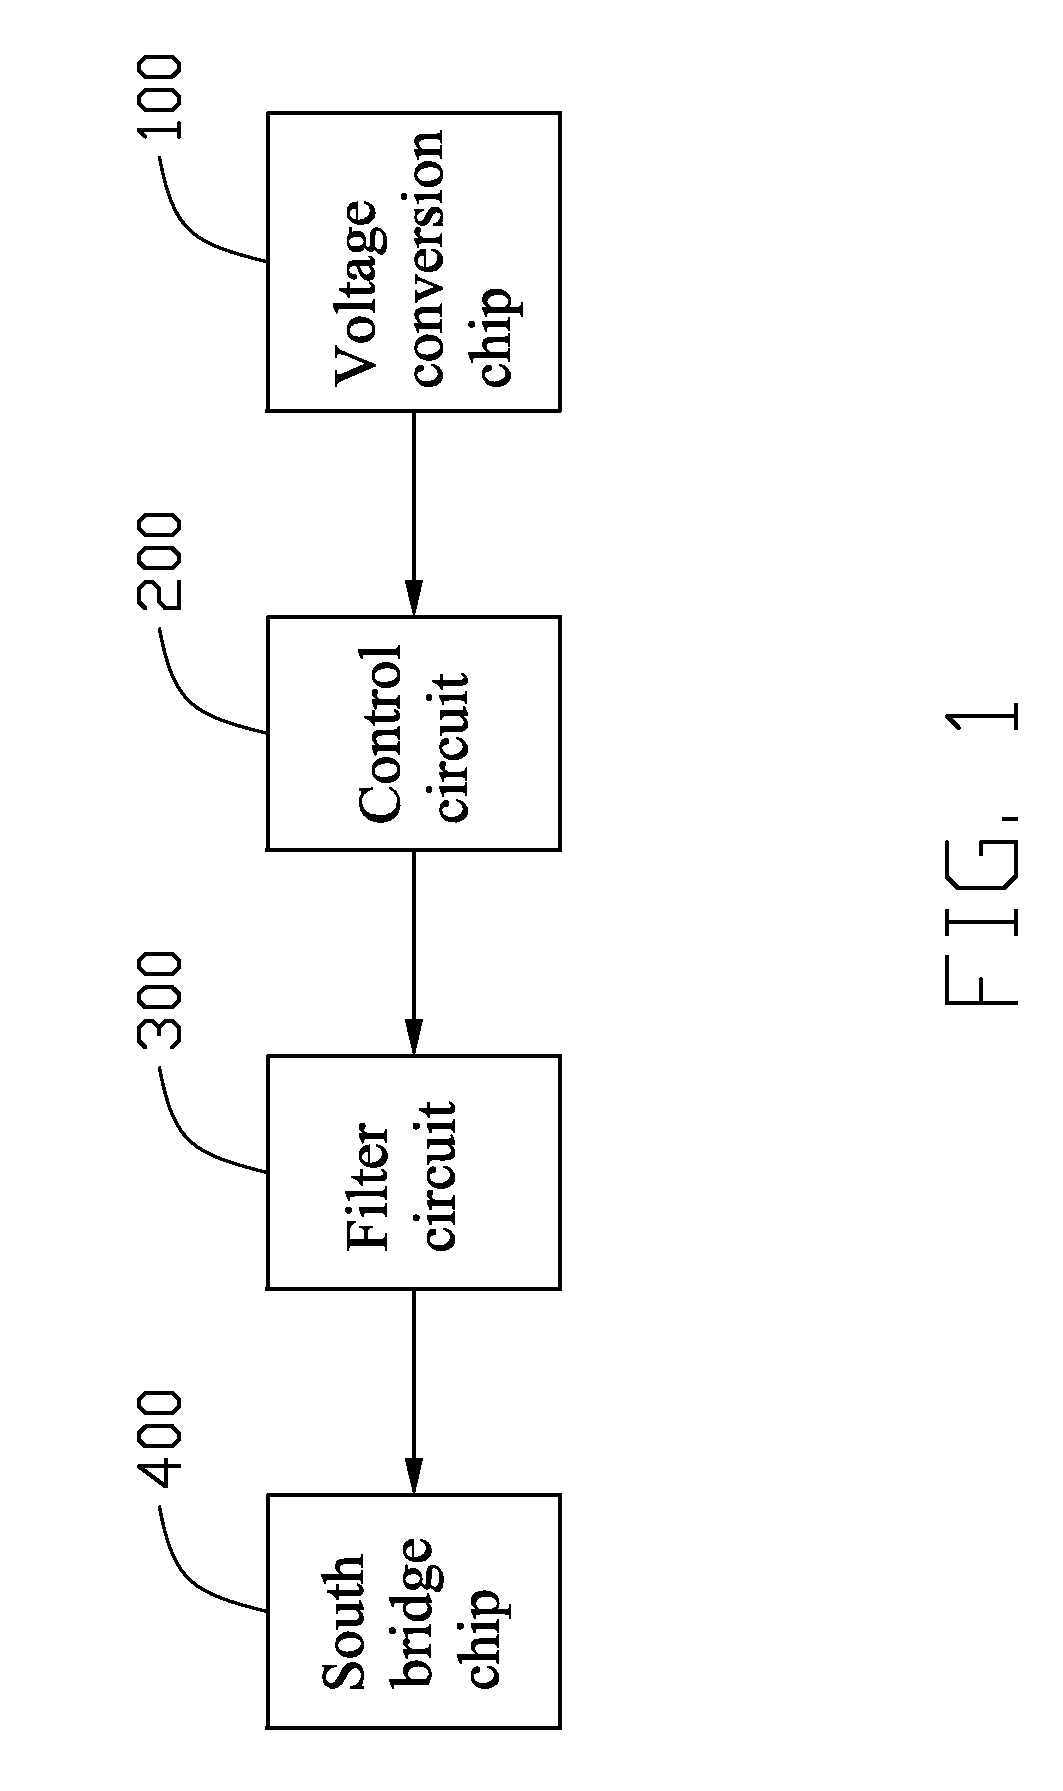 Power supply circuit for south bridge chip